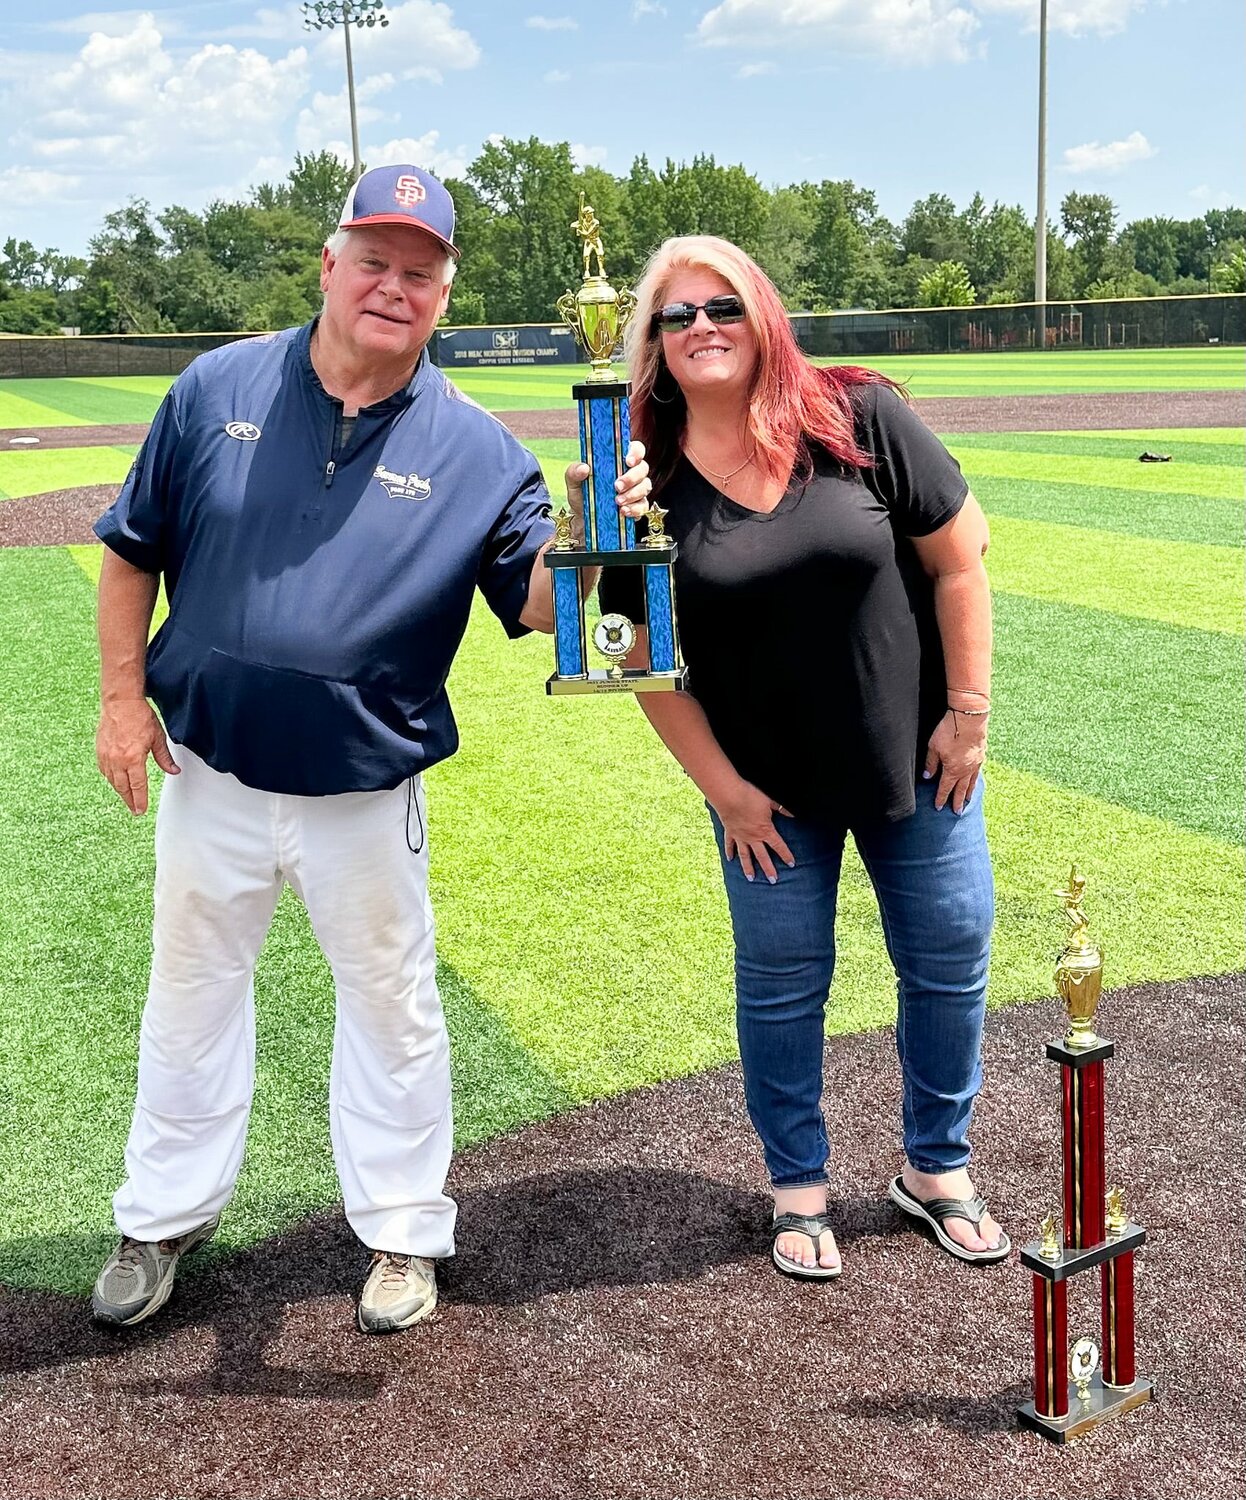 Coach Dave Ferris (left) accepted the runner-up trophy from an American Legion state representative.